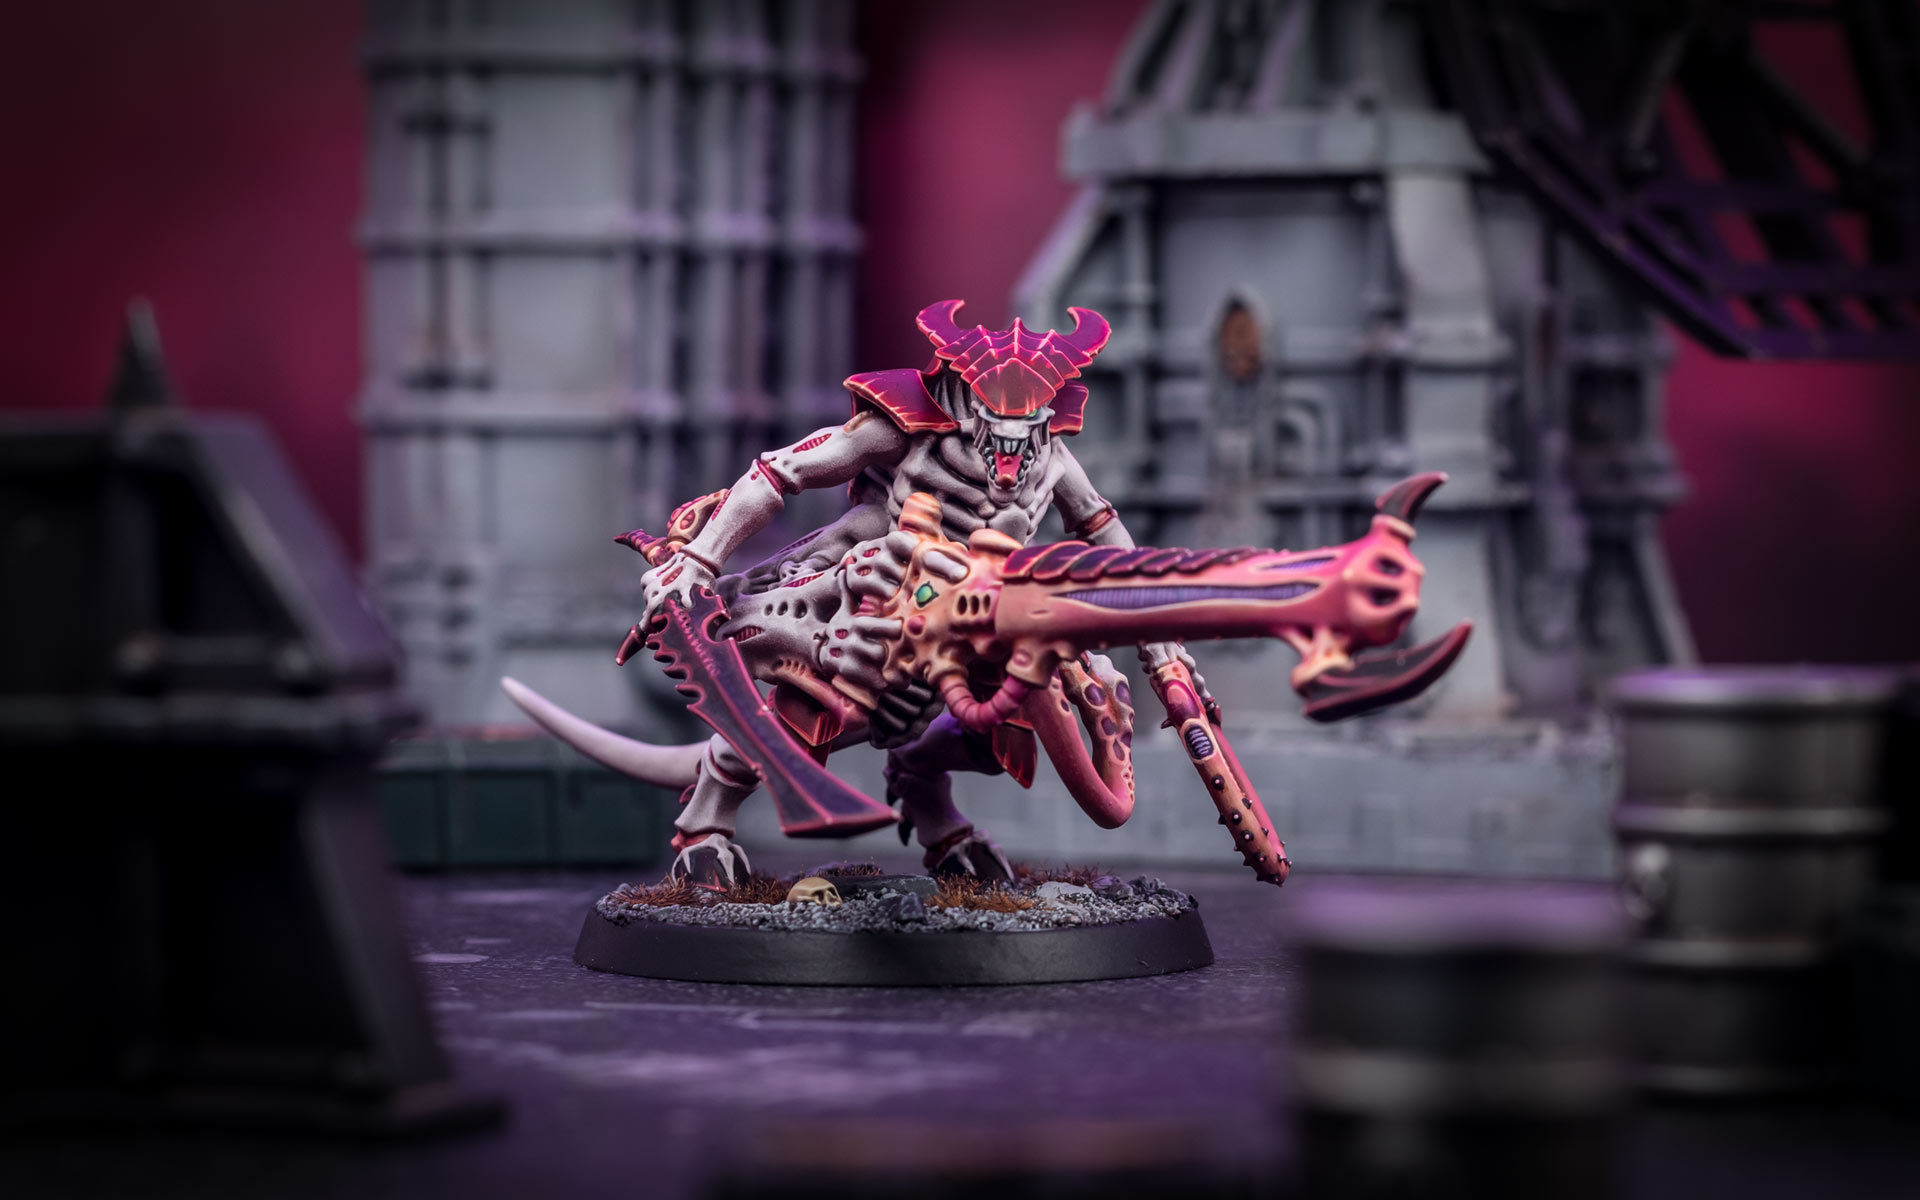 Cinematic shot of a Hive Fleet Kraken Tyranid Warriors Heavy Gunner with Venom Cannon, painted by Stahly